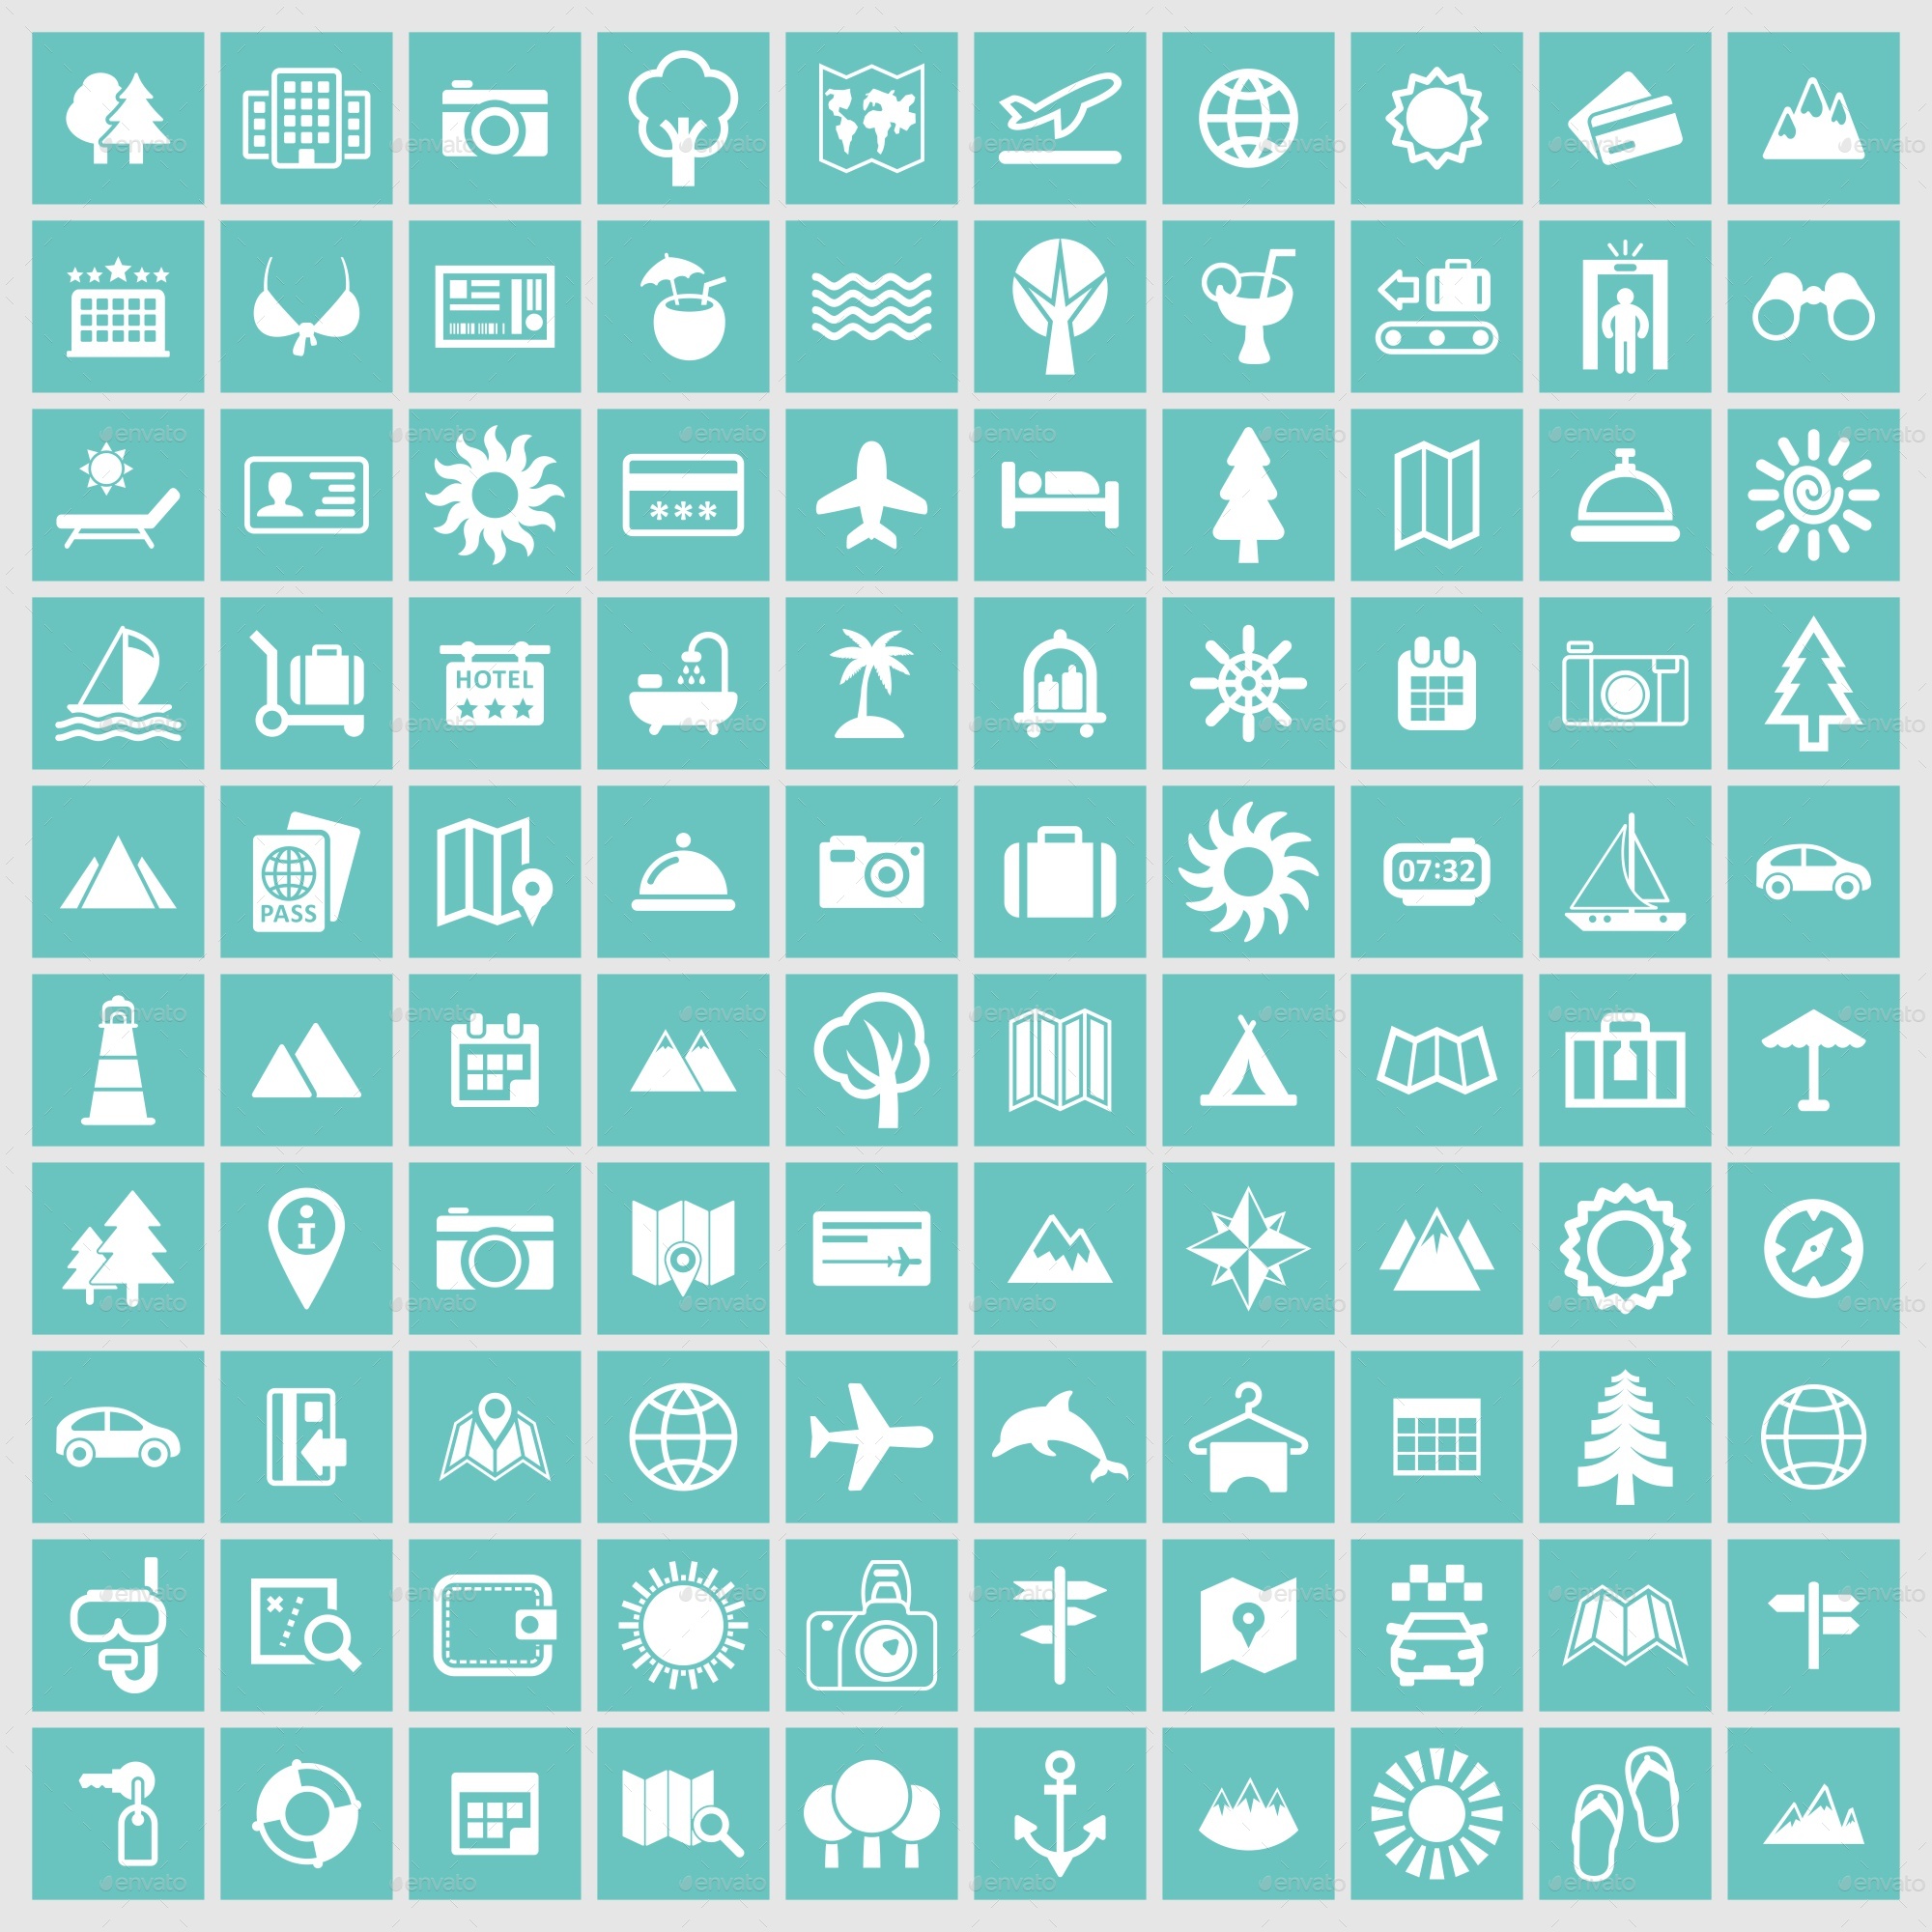 Tourism Vector Icons by Kurdanfell | GraphicRiver